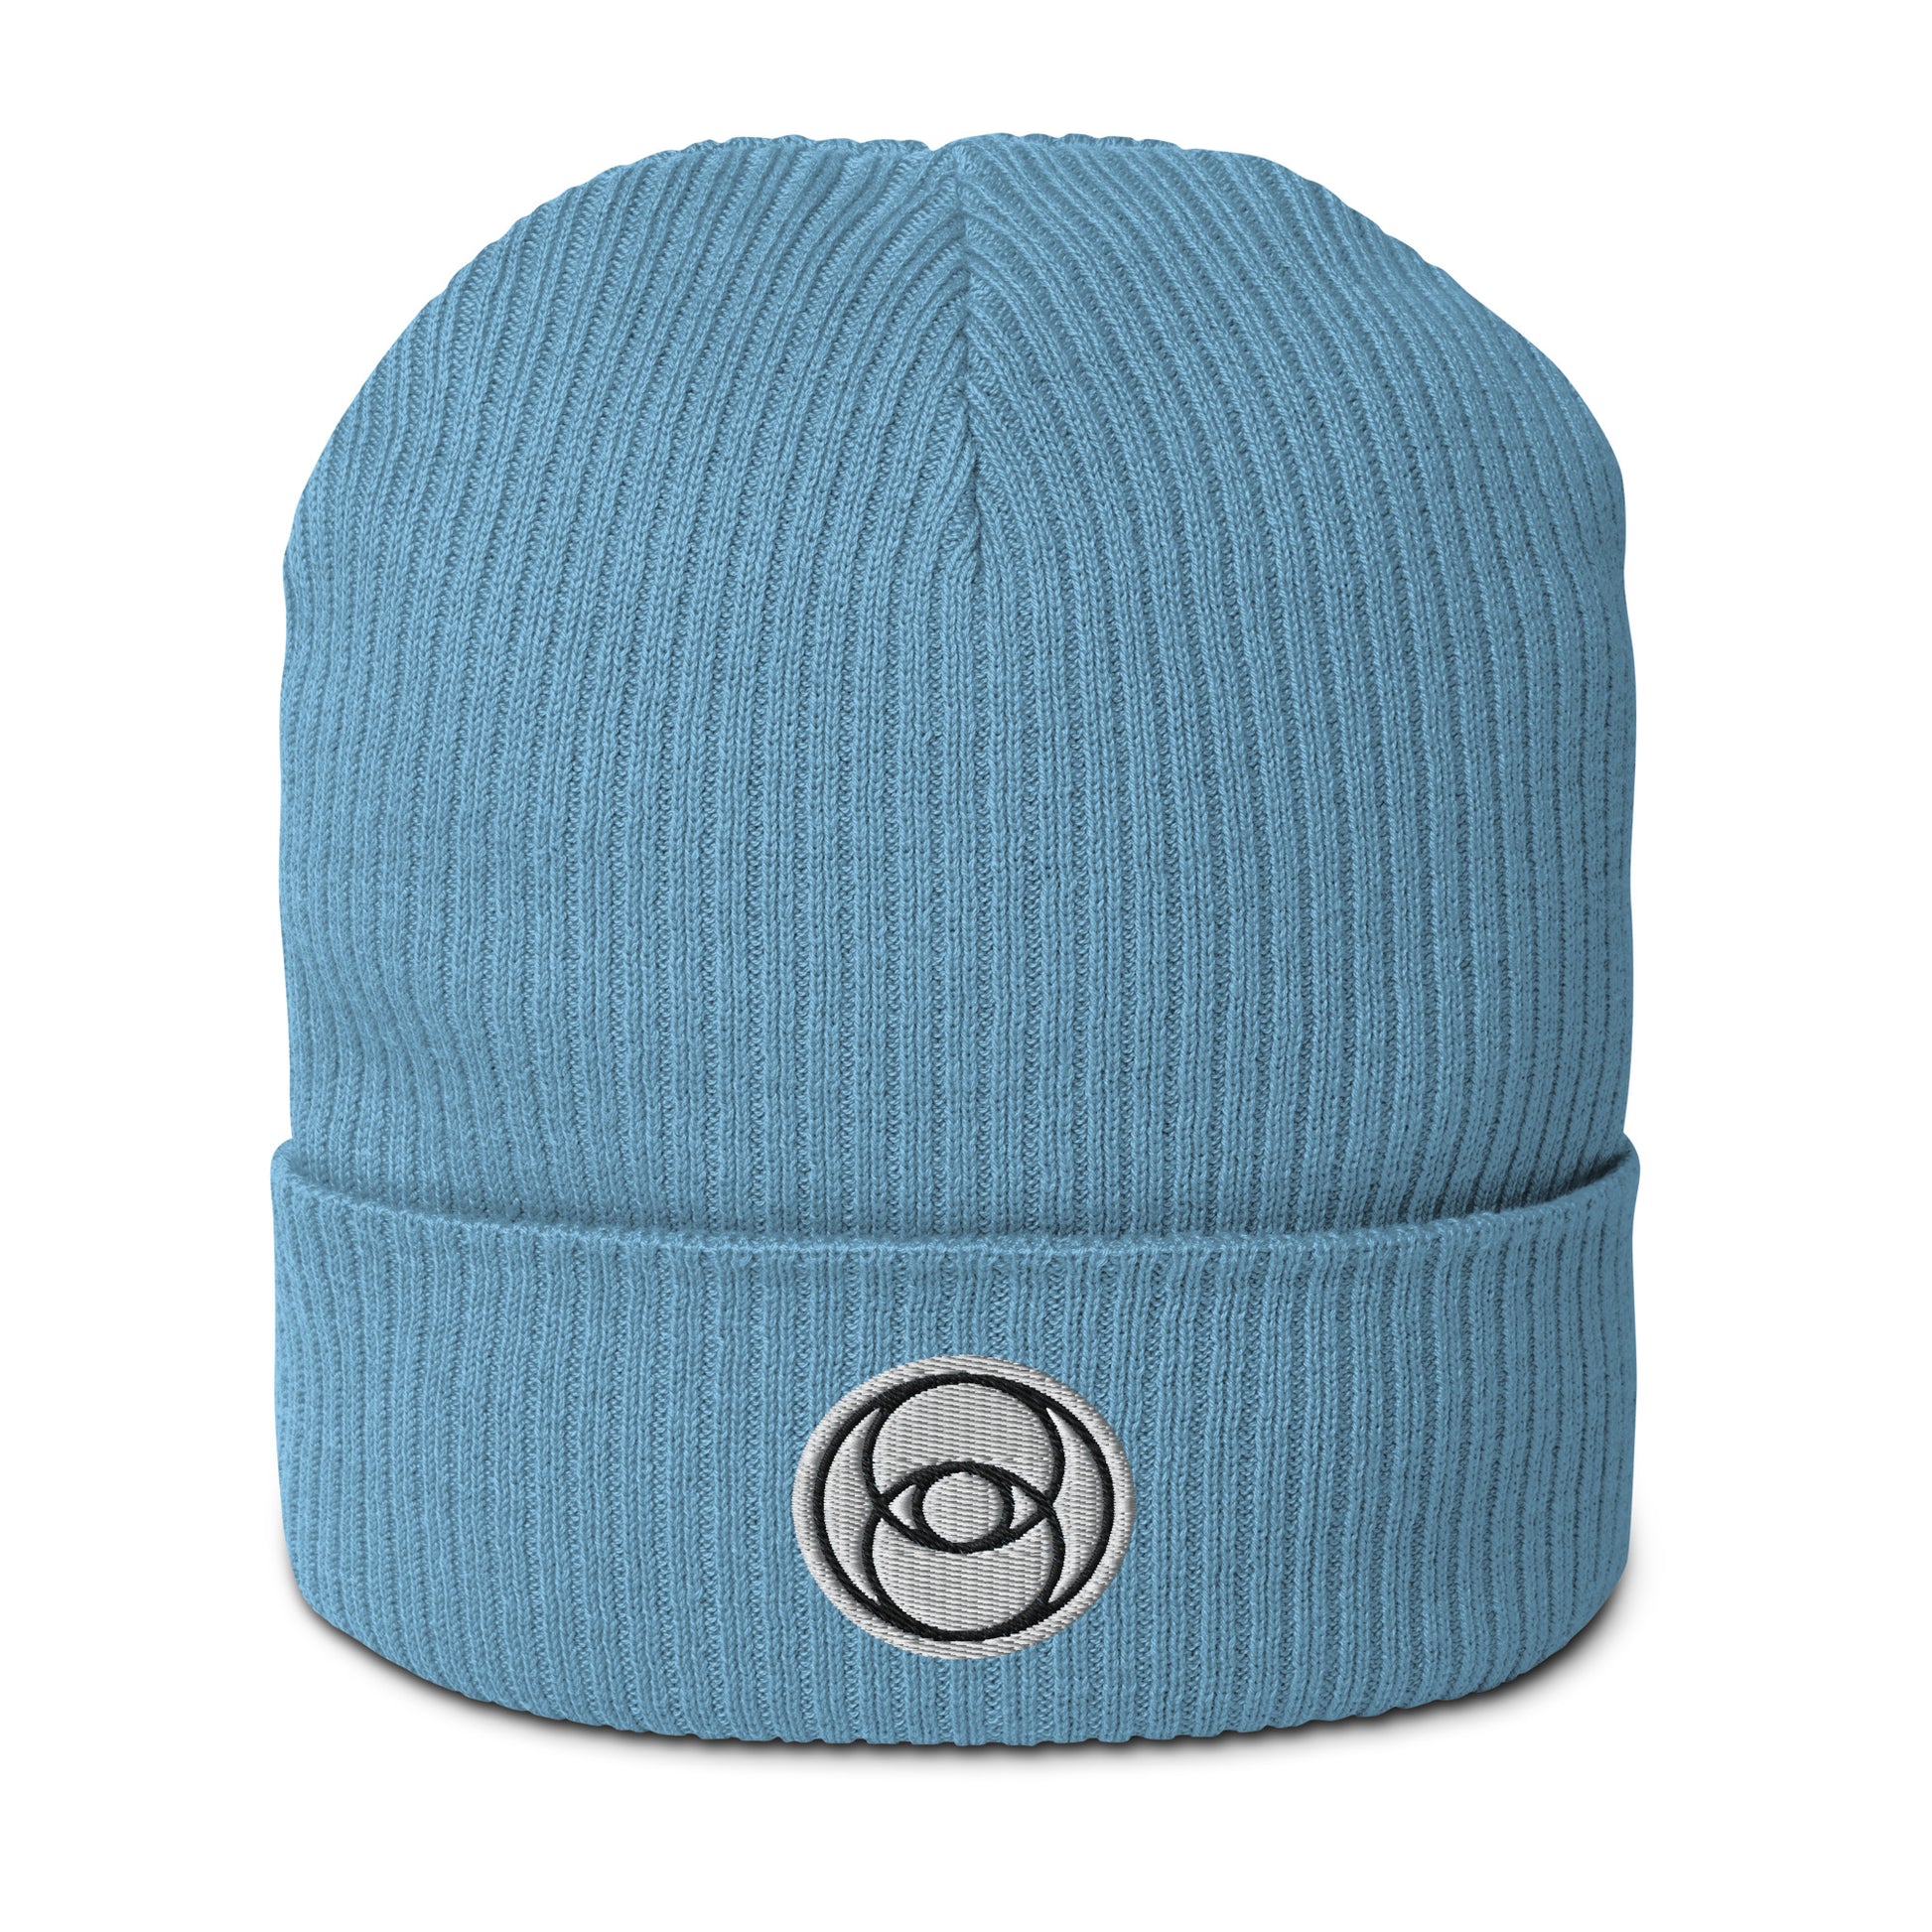 The Vesica Piscis Organic Cotton Beanie in Bermuda Blue is all about harmonious unions. Made of organic cotton and featuring a Vesica Piscis embroidery, this piece is something special. The Vesica Piscis symbolizes unity, balance, and connecting with the universe. Our beanies are made with breathable, lightweight fabric and natural materials, so you can stay comfy while you're exploring the mysteries of existence. Grab one of these beanies and add a touch of divinity to your style.